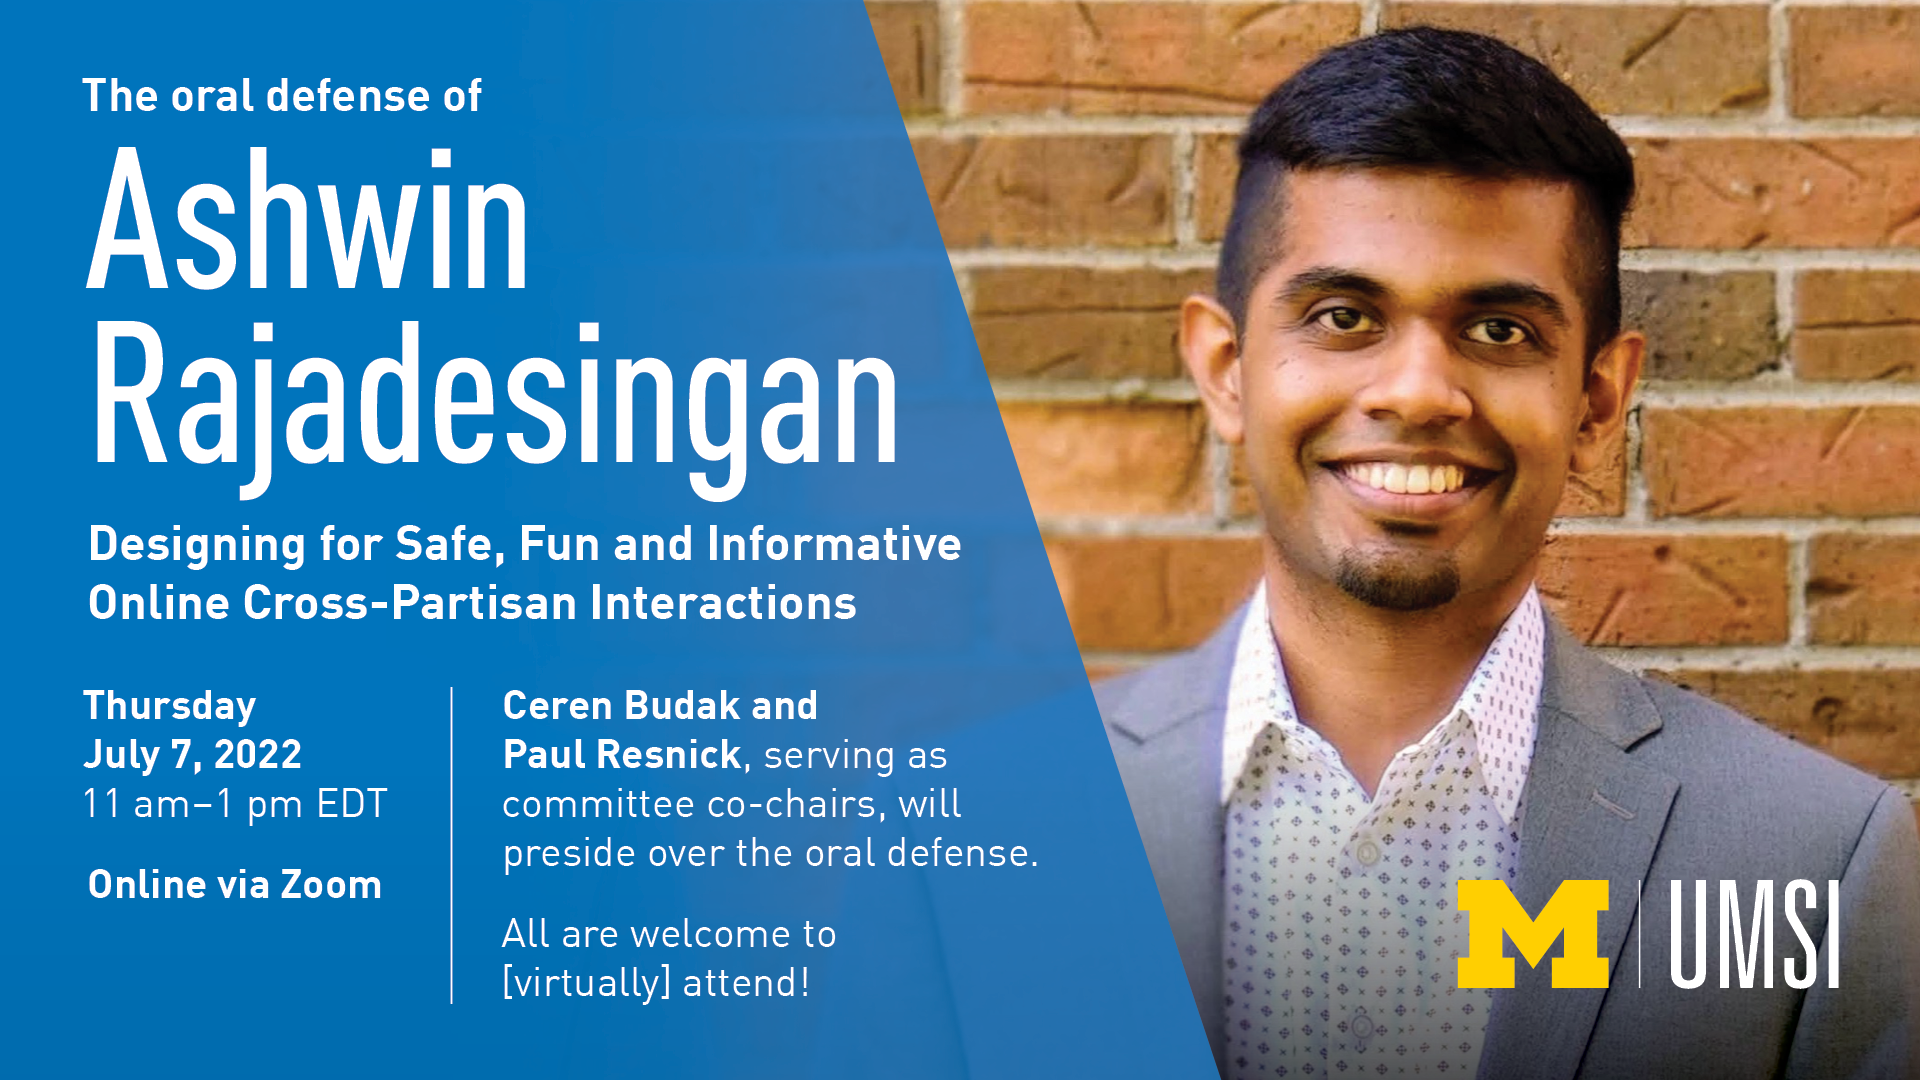 “The oral defense of Ashwin Rajadesingan. Designing for Safe, Fun and Informative Online Cross-Partisan Interactions. Thursday, July 7, 2022. 11 a.m. - 1 p.m. EDT. Online via Zoom. Ceren Budak and Paul Resnick, serving as committee co-chairs, will preside over the oral defense. All are welcome to [virtually] attend!” 